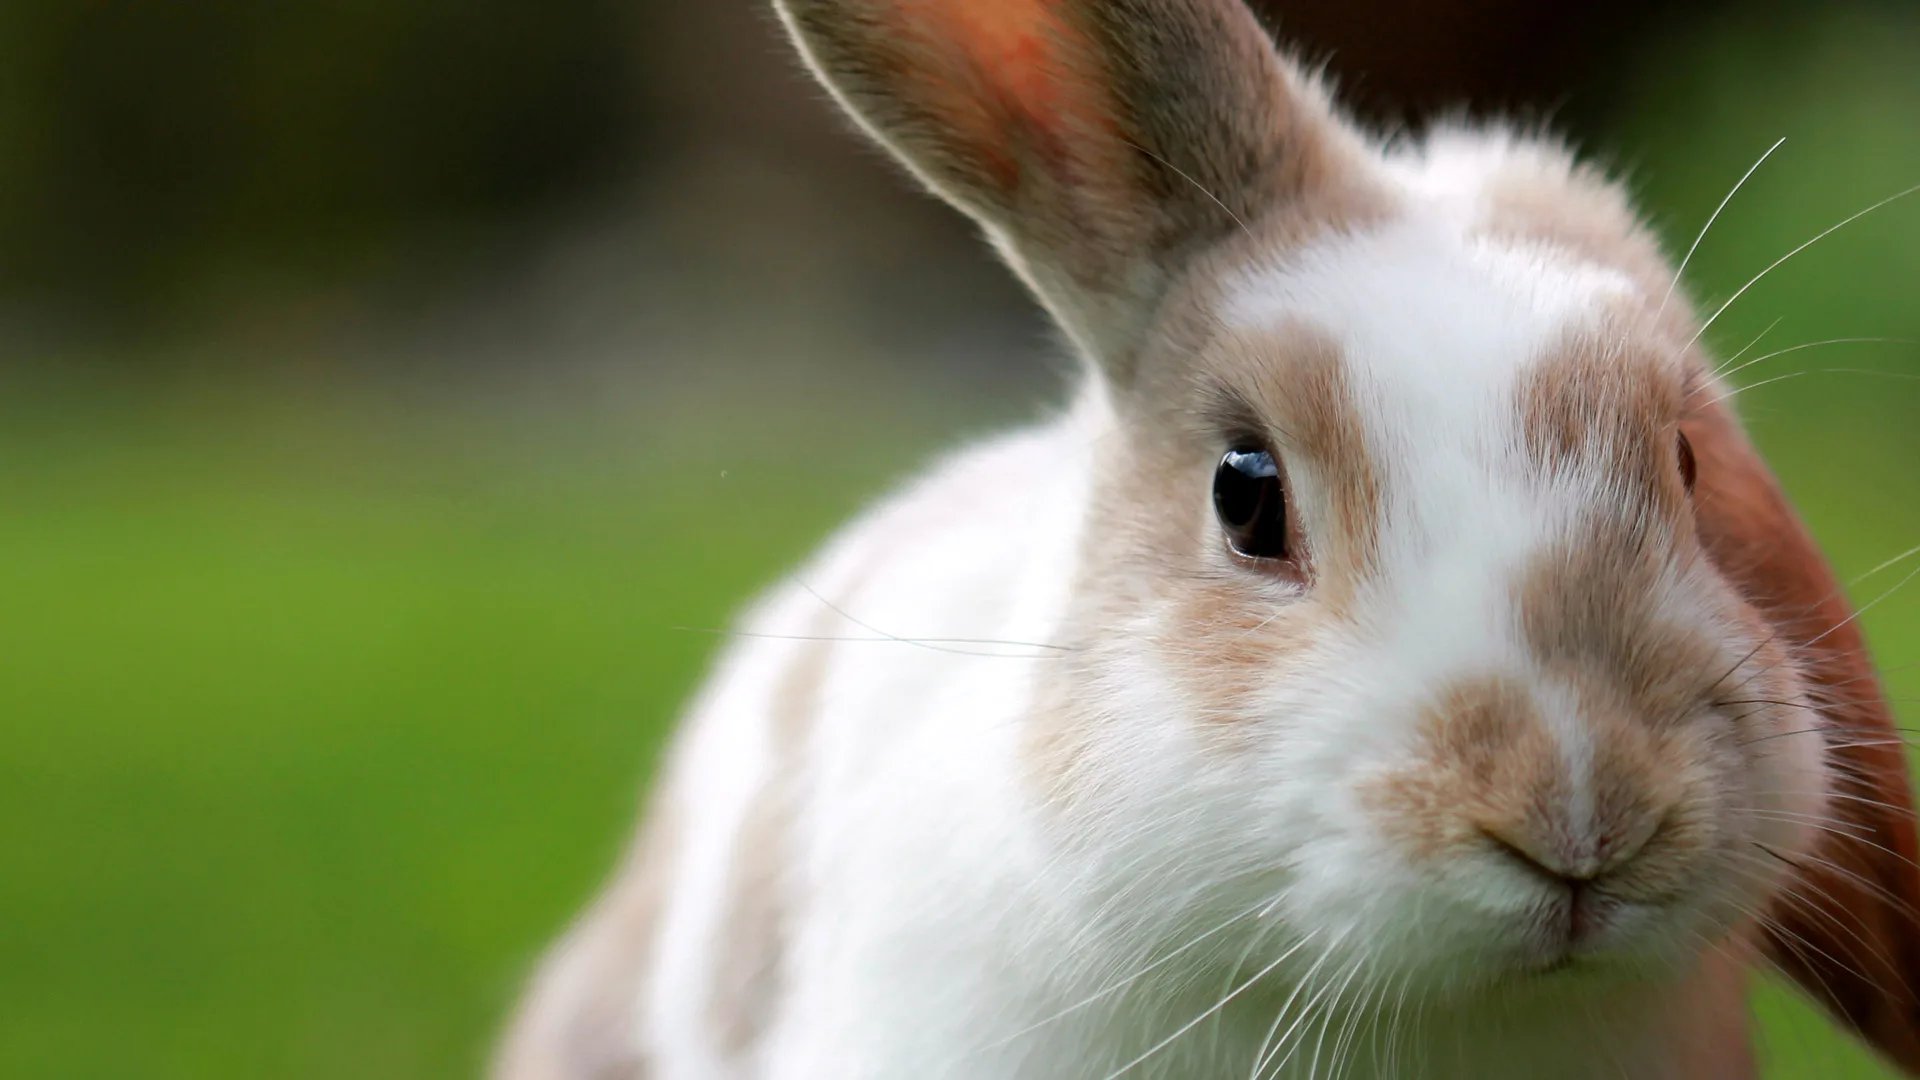 A close-up photograph of a soft white and beige rabbit with one ear up and one ear down on a soft focus background of grass